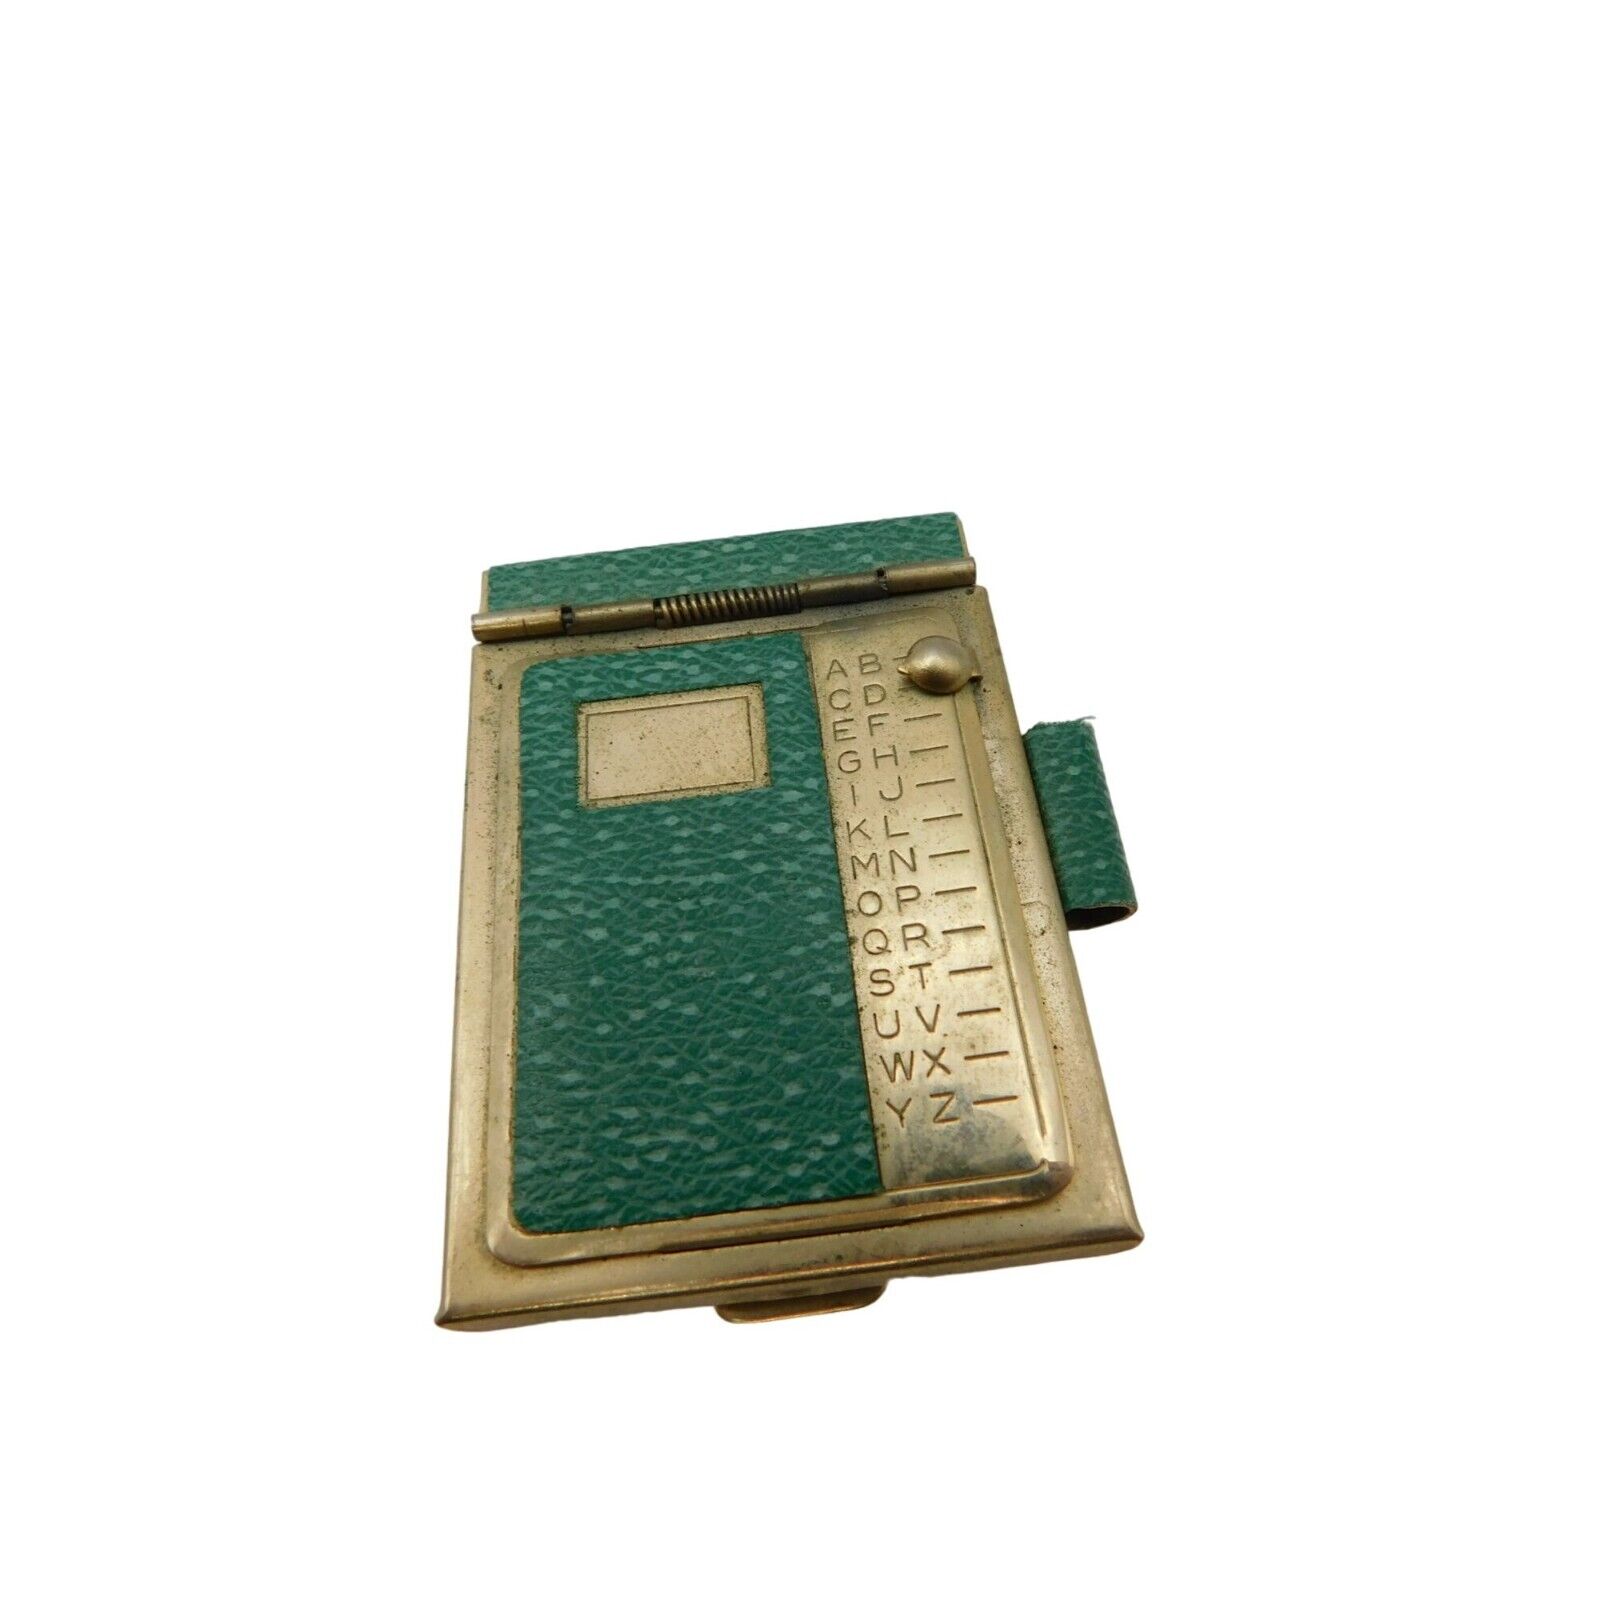 Vintage Miniature Pocket Size Rolodex-Style Address Indexing Book Green & Brass